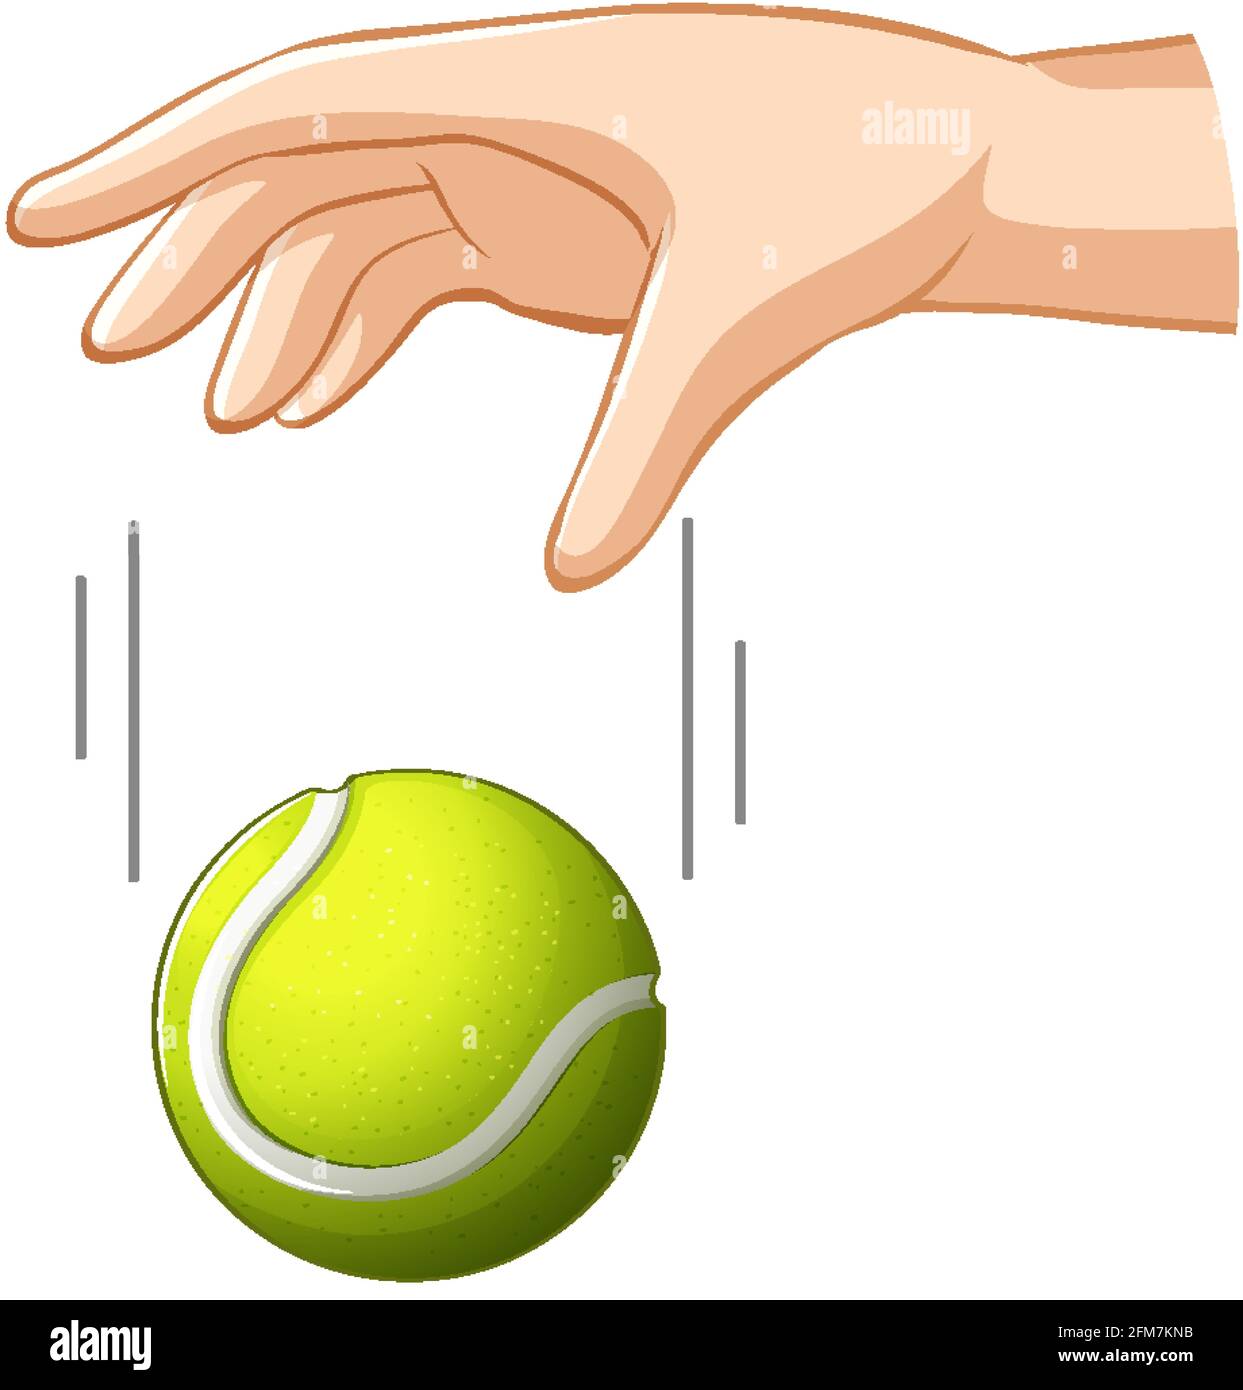 Hand Dropping Tennis Ball For Gravity Experiment Illustration Stock